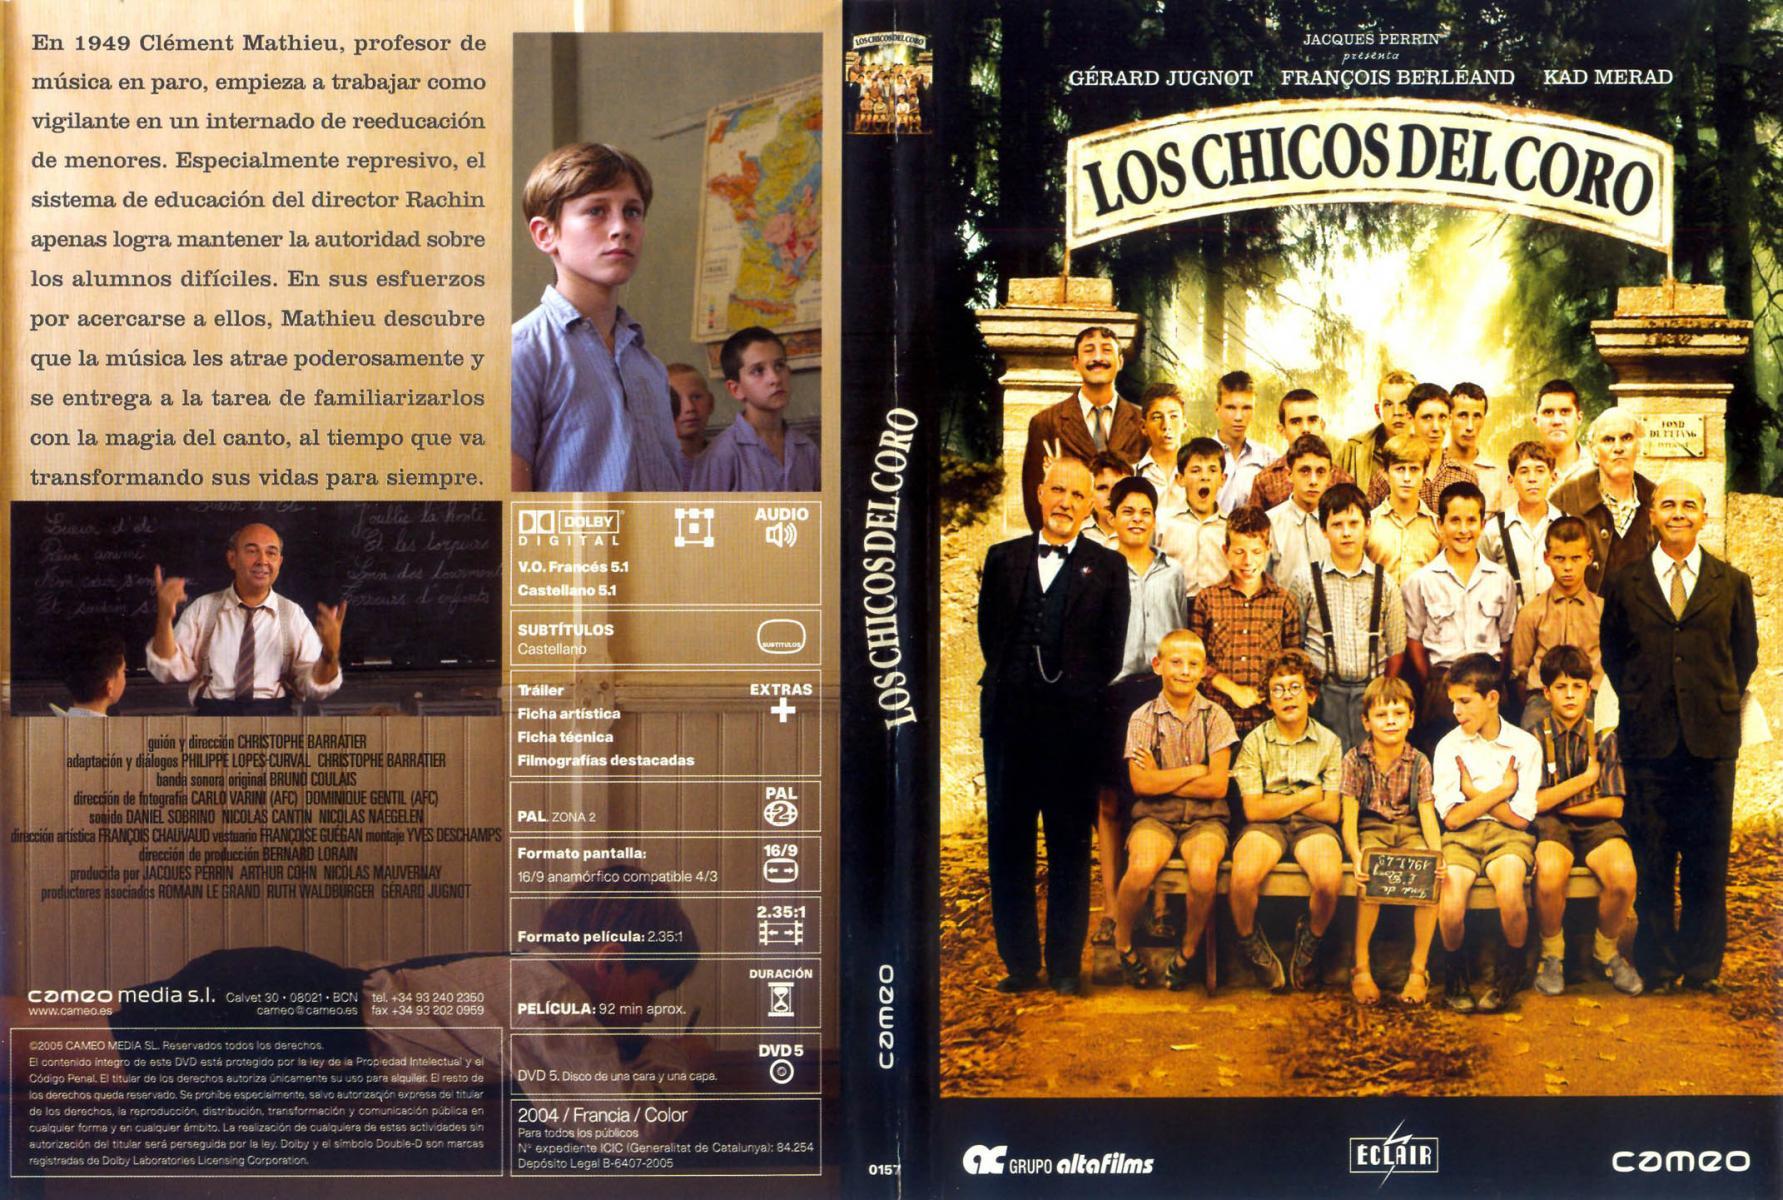 Les Choristes DVD 2004 The Chorus / Directed by Christophe